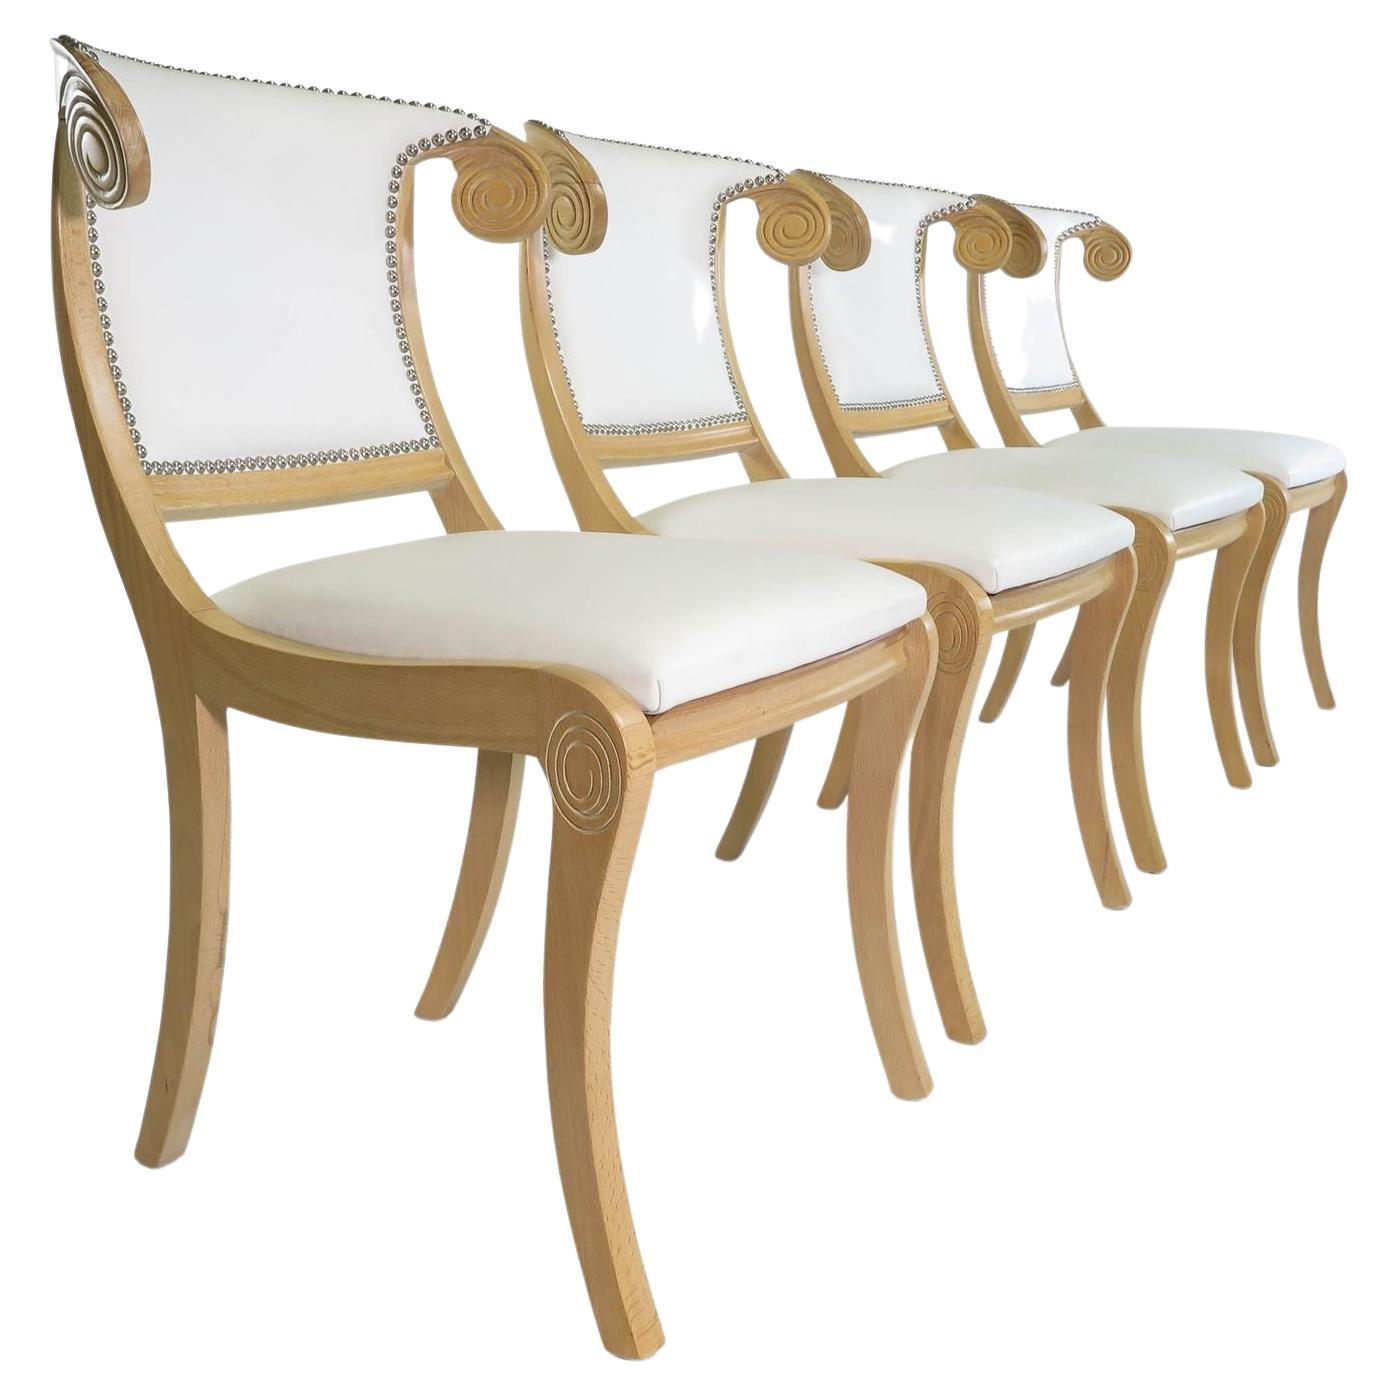 1940's Hollywood Regency Dining Chairs in White Leather